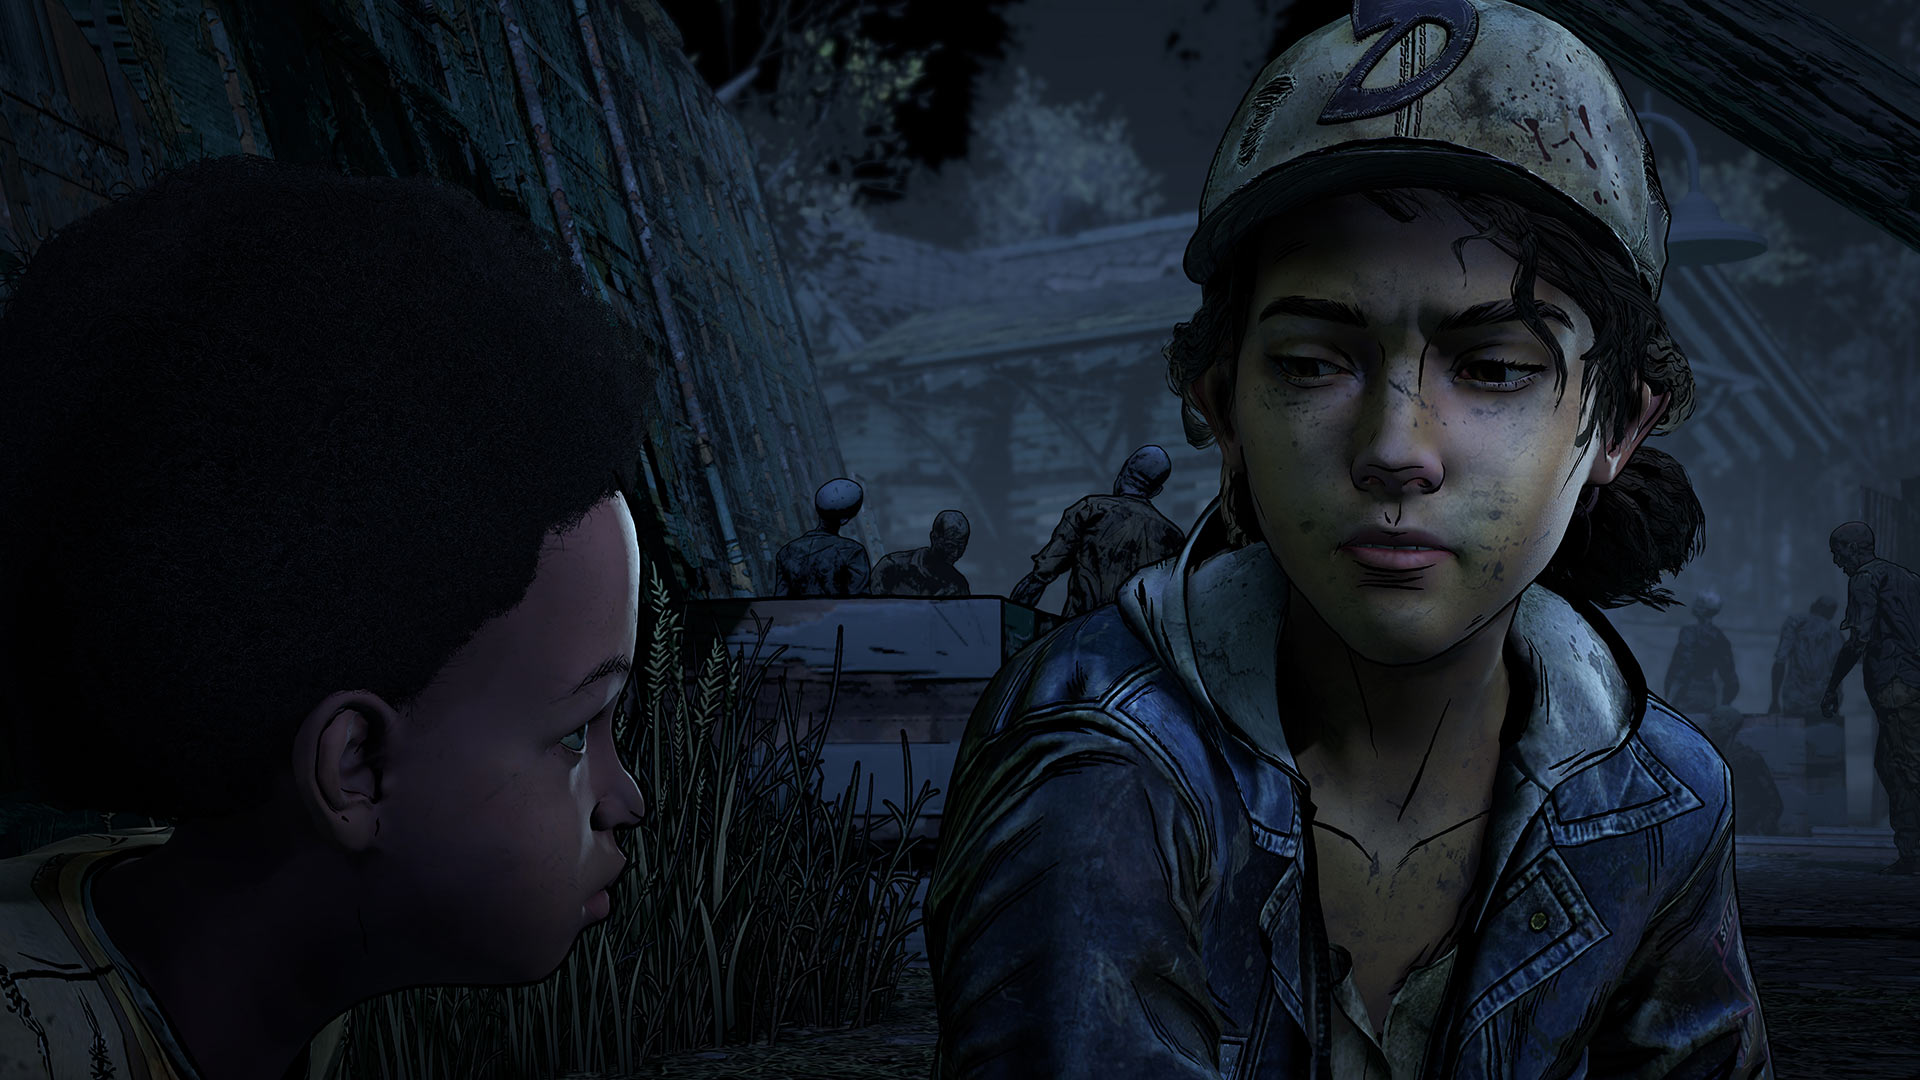 There are no plans for a new season of The Walking Dead game, Skybound says